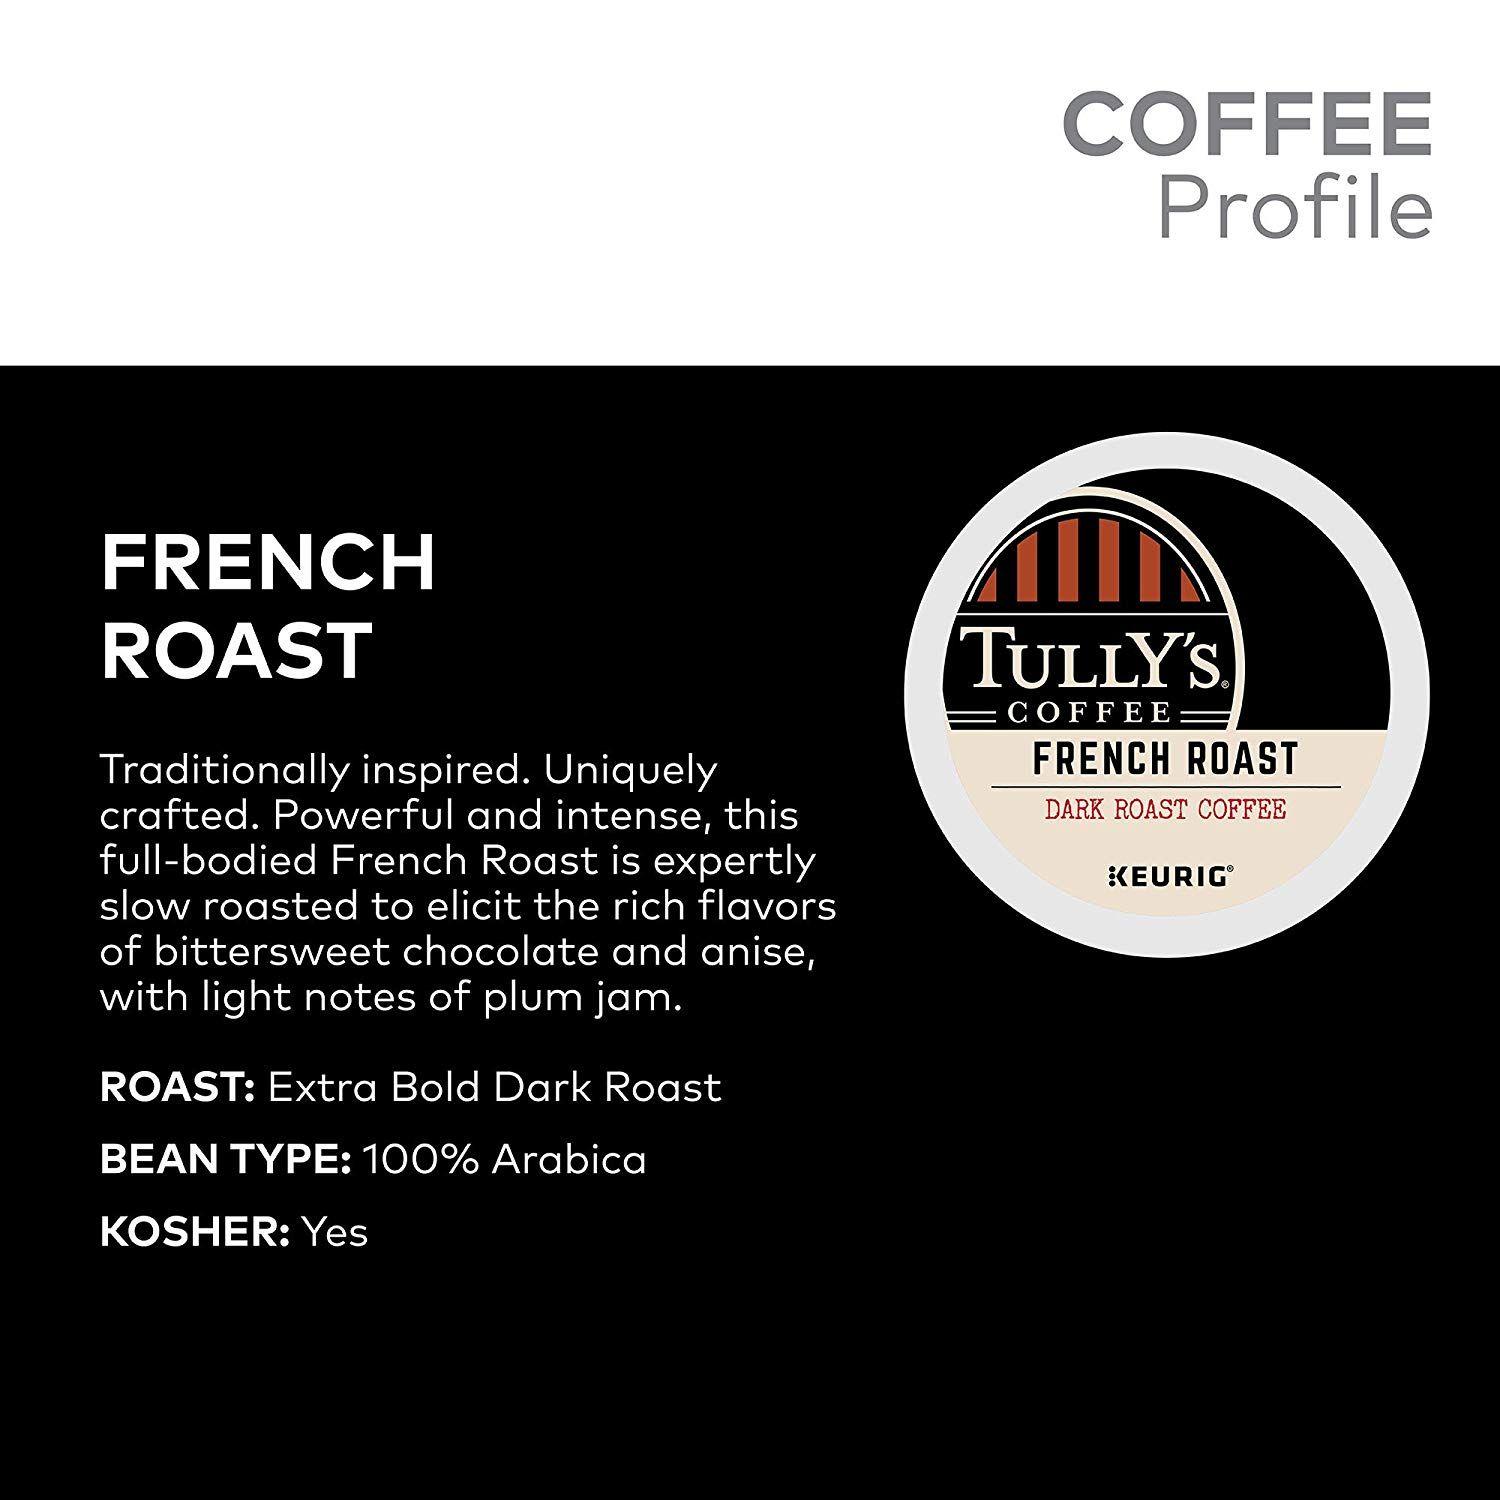 Dark Roast Coffee Brands Logo - Amazon.com : Tully's Coffee House Blend K-Cup for Keurig Brewers ...